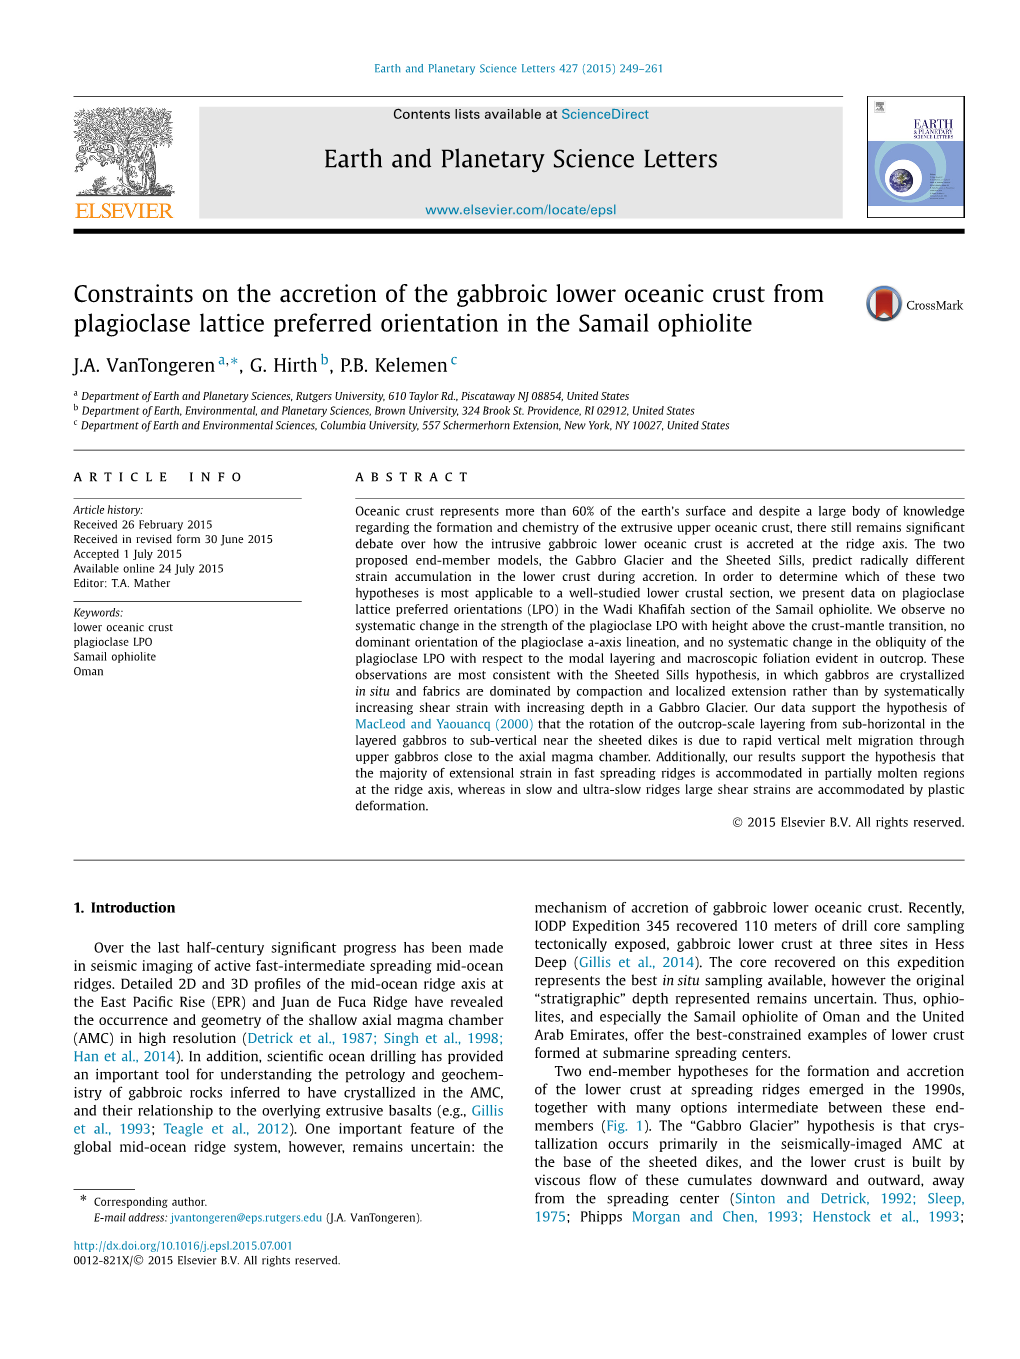 Constraints on the Accretion of the Gabbroic Lower Oceanic Crust from Plagioclase Lattice Preferred Orientation in the Samail Ophiolite ∗ J.A